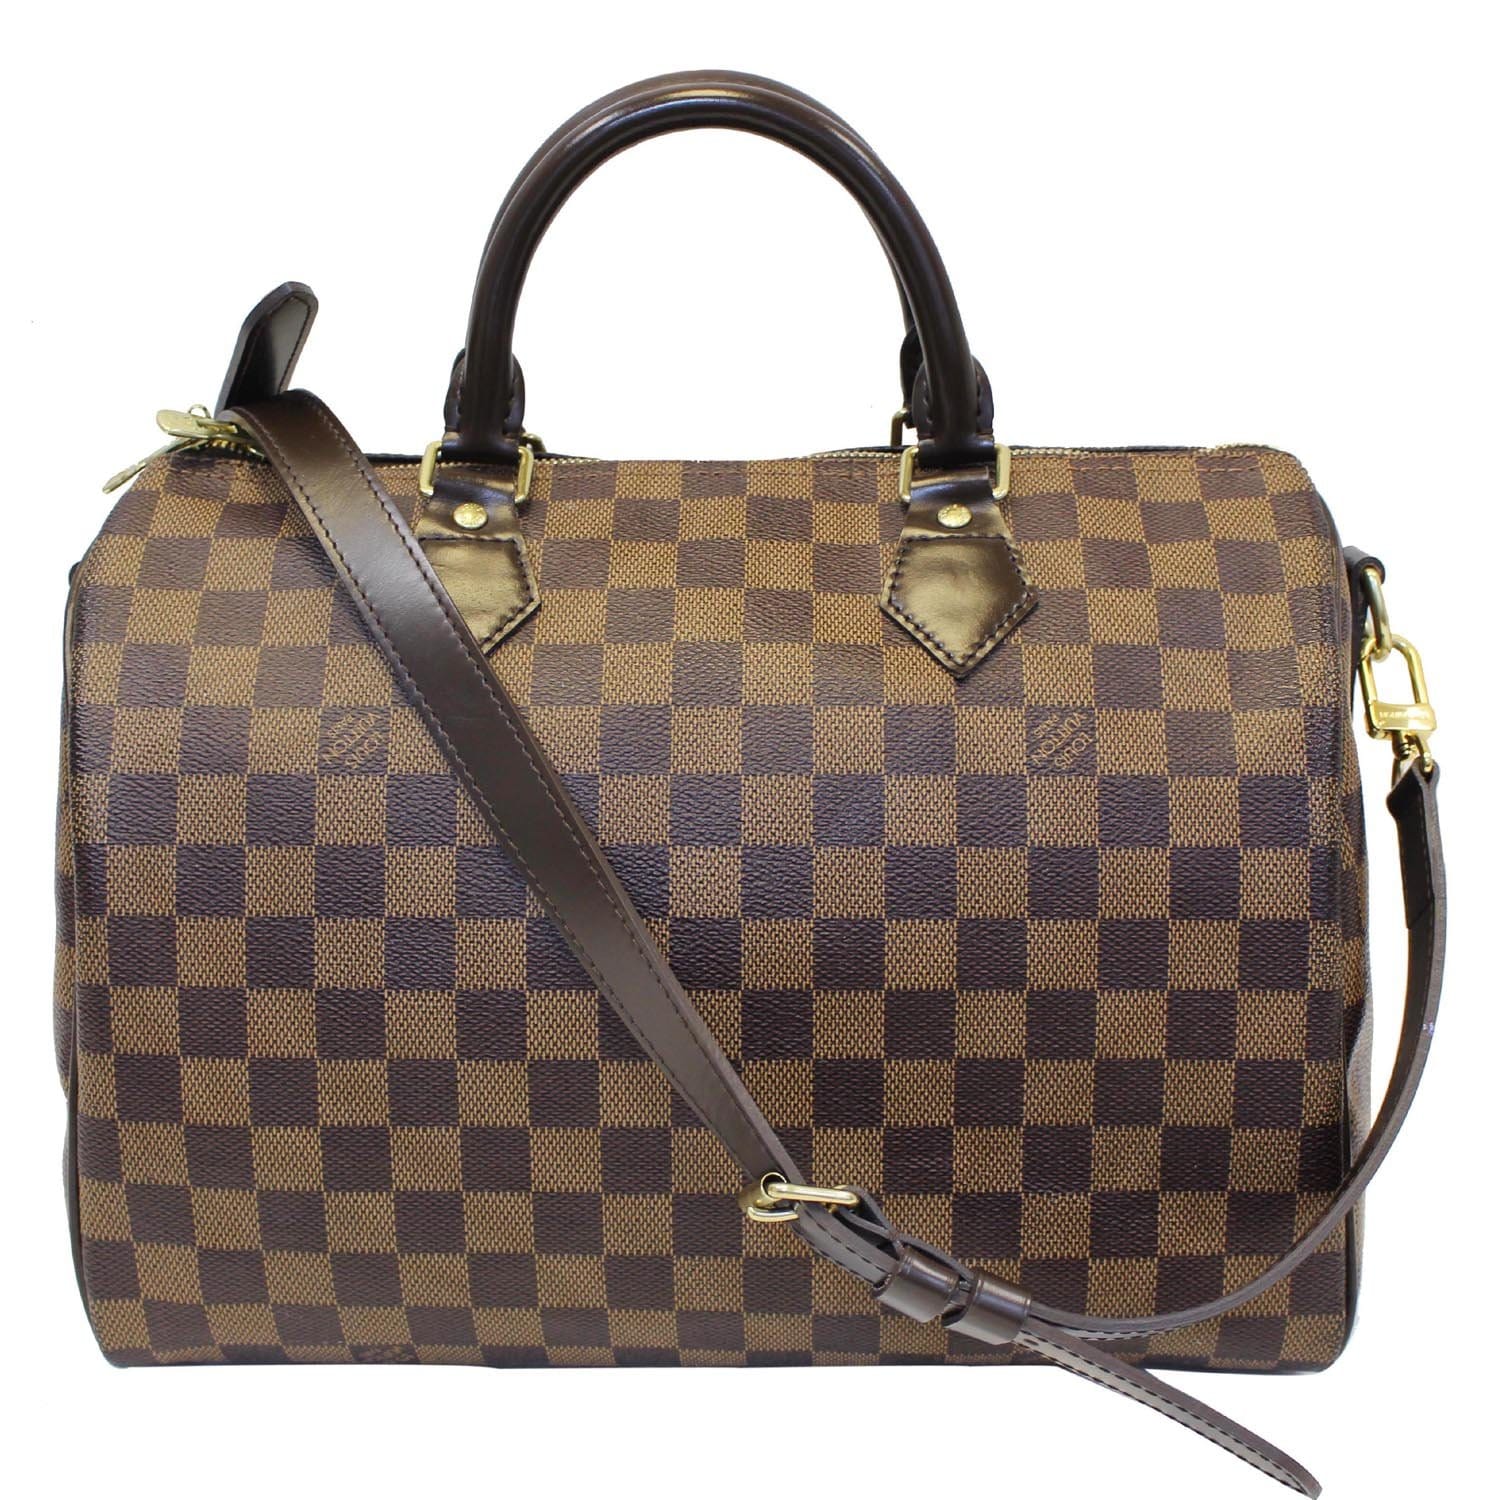 Is THIS the only LV bag YOU NEED? ⭐ NEW⭐ Louis Vuitton SPEEDY 20 DAMIER  EBENE🍫 